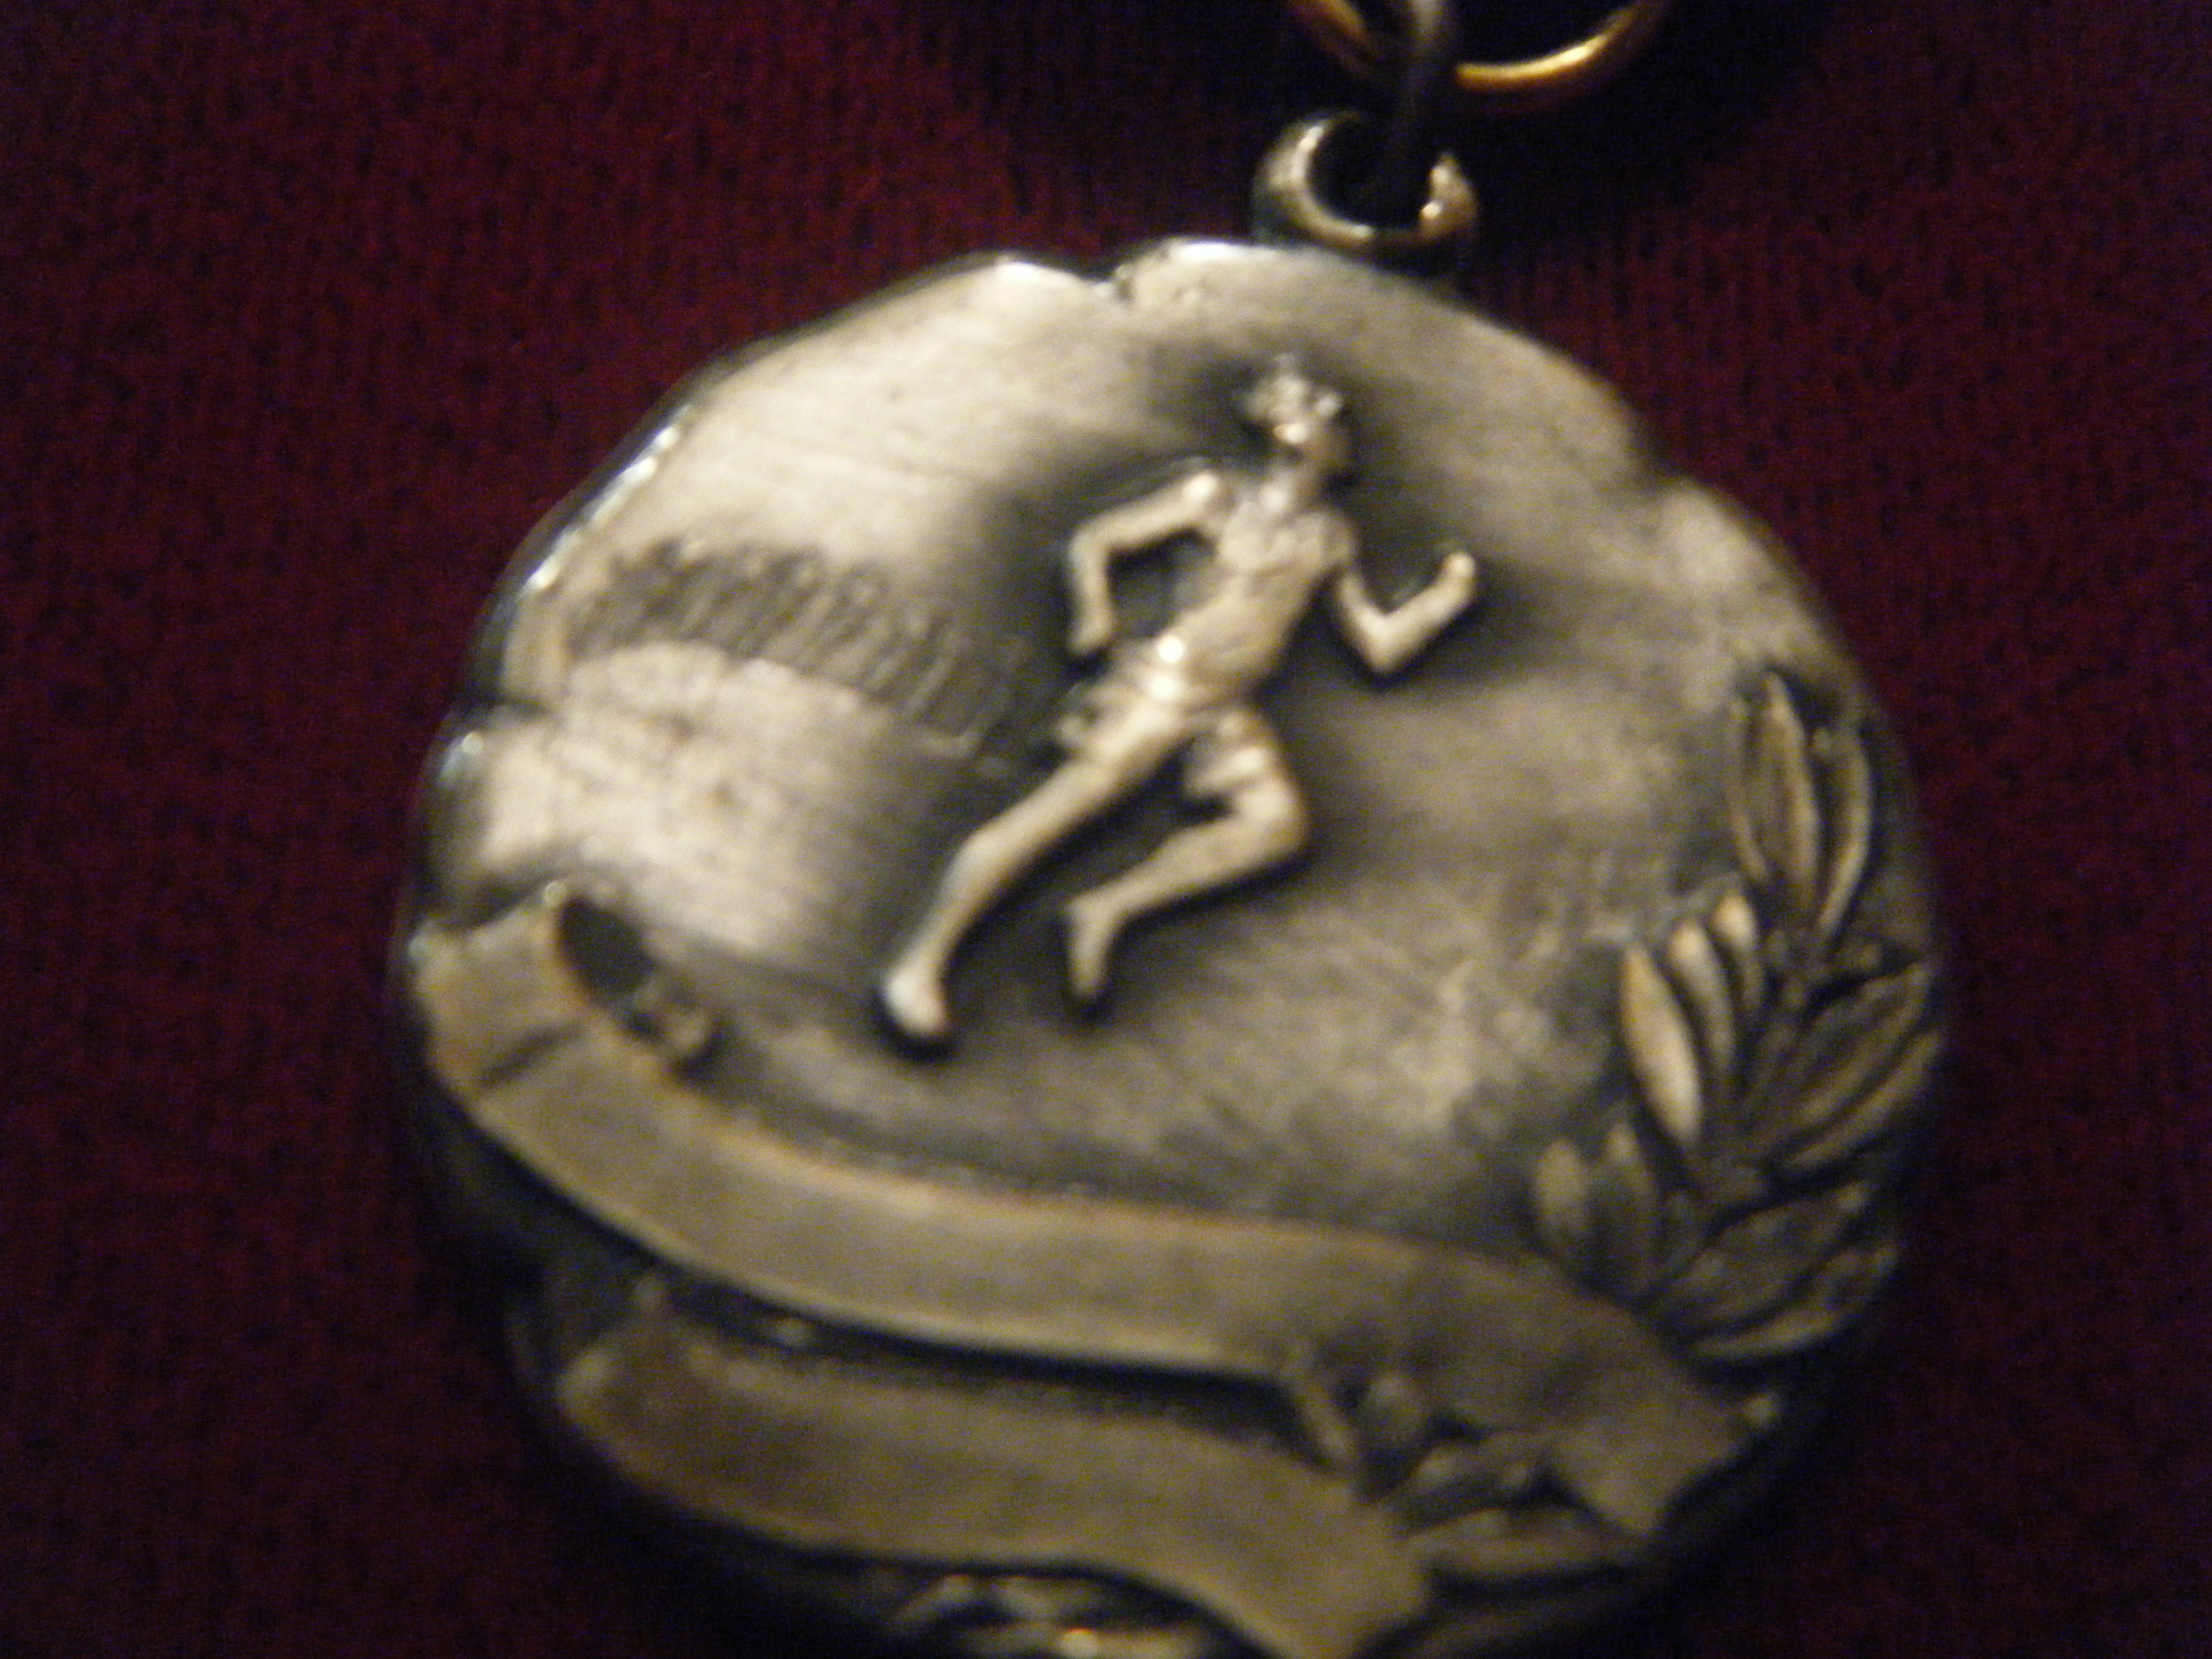 Track and Field Metal